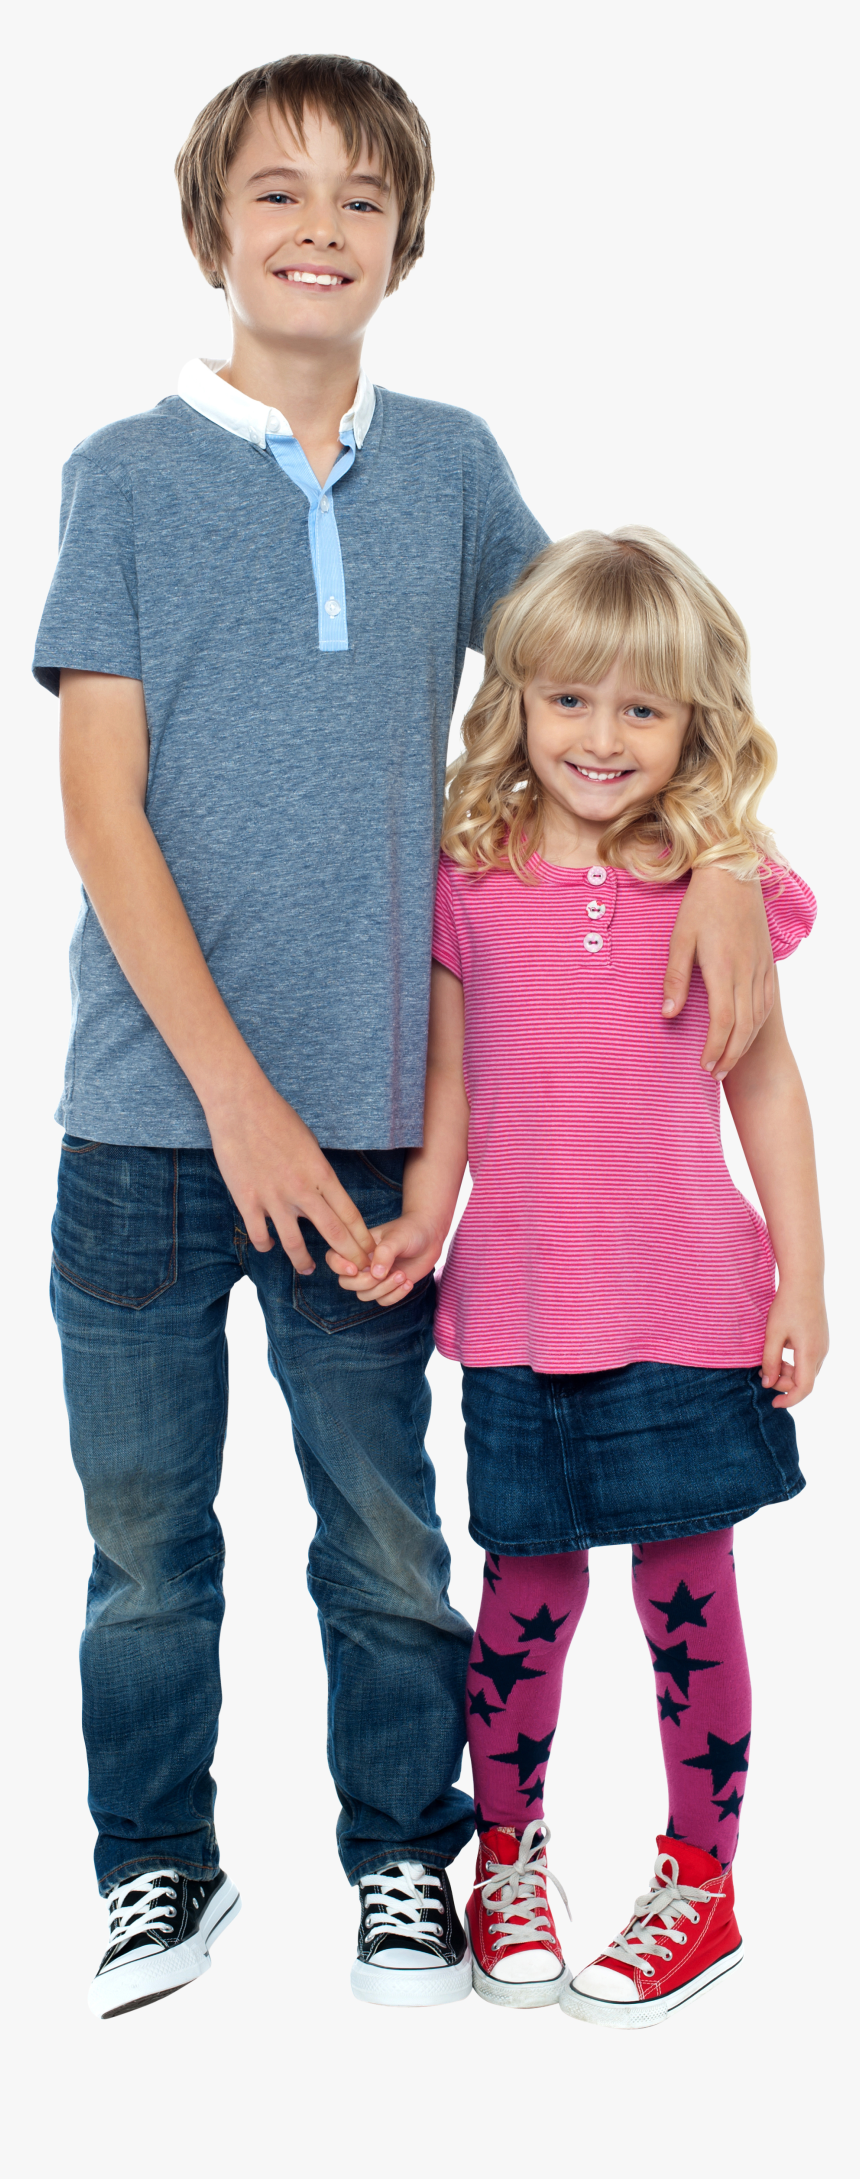 Boy And Girl Png Image - Boy And